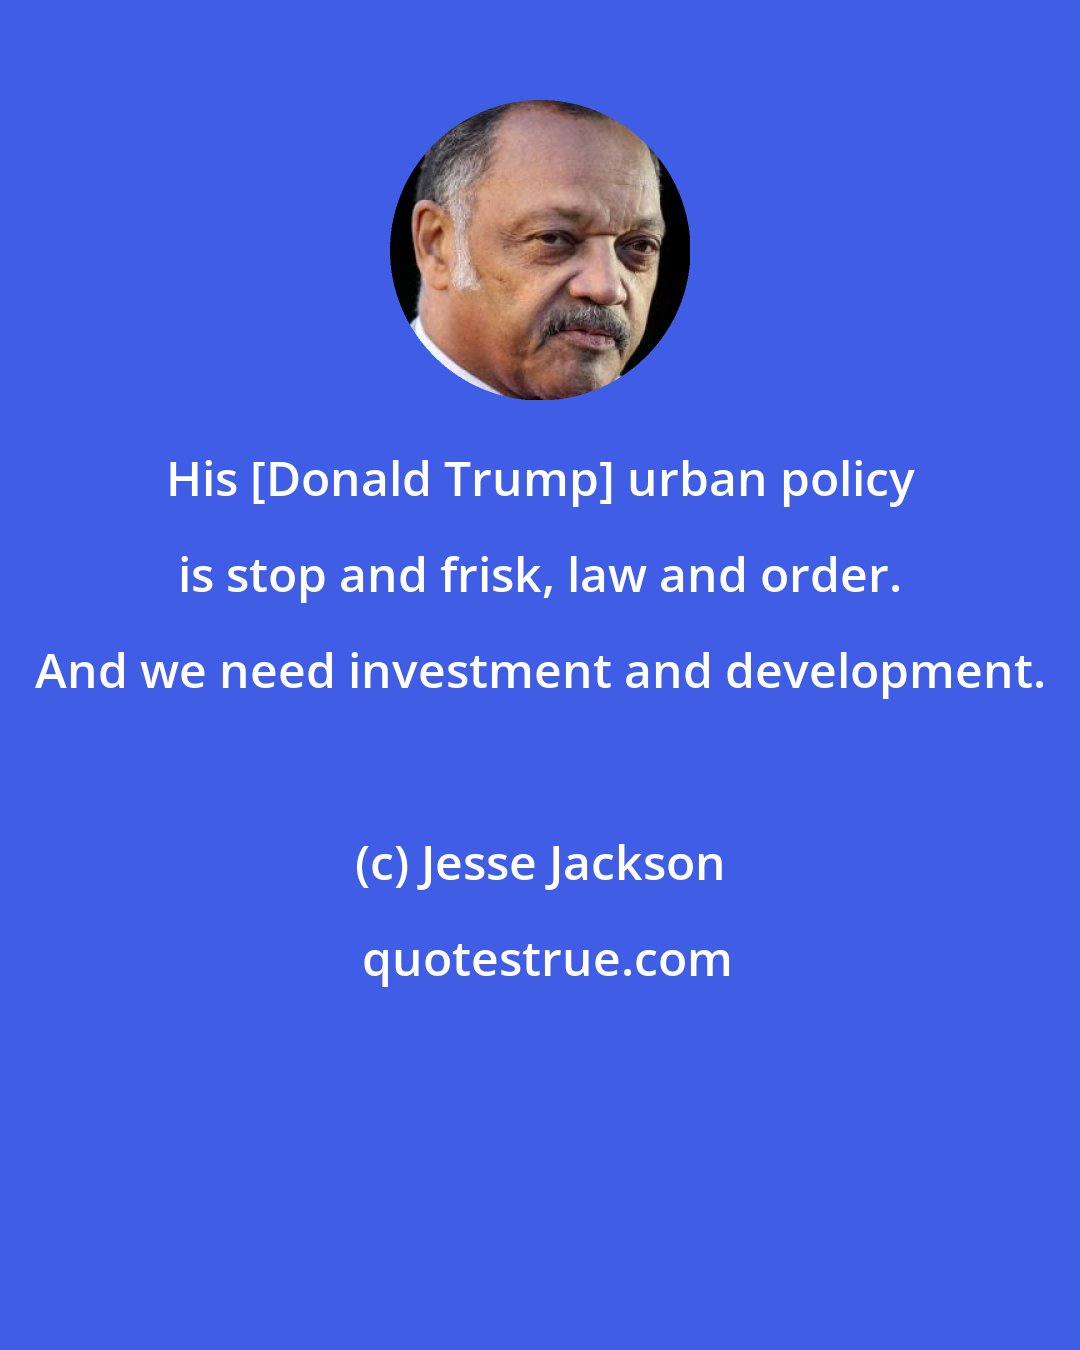 Jesse Jackson: His [Donald Trump] urban policy is stop and frisk, law and order. And we need investment and development.